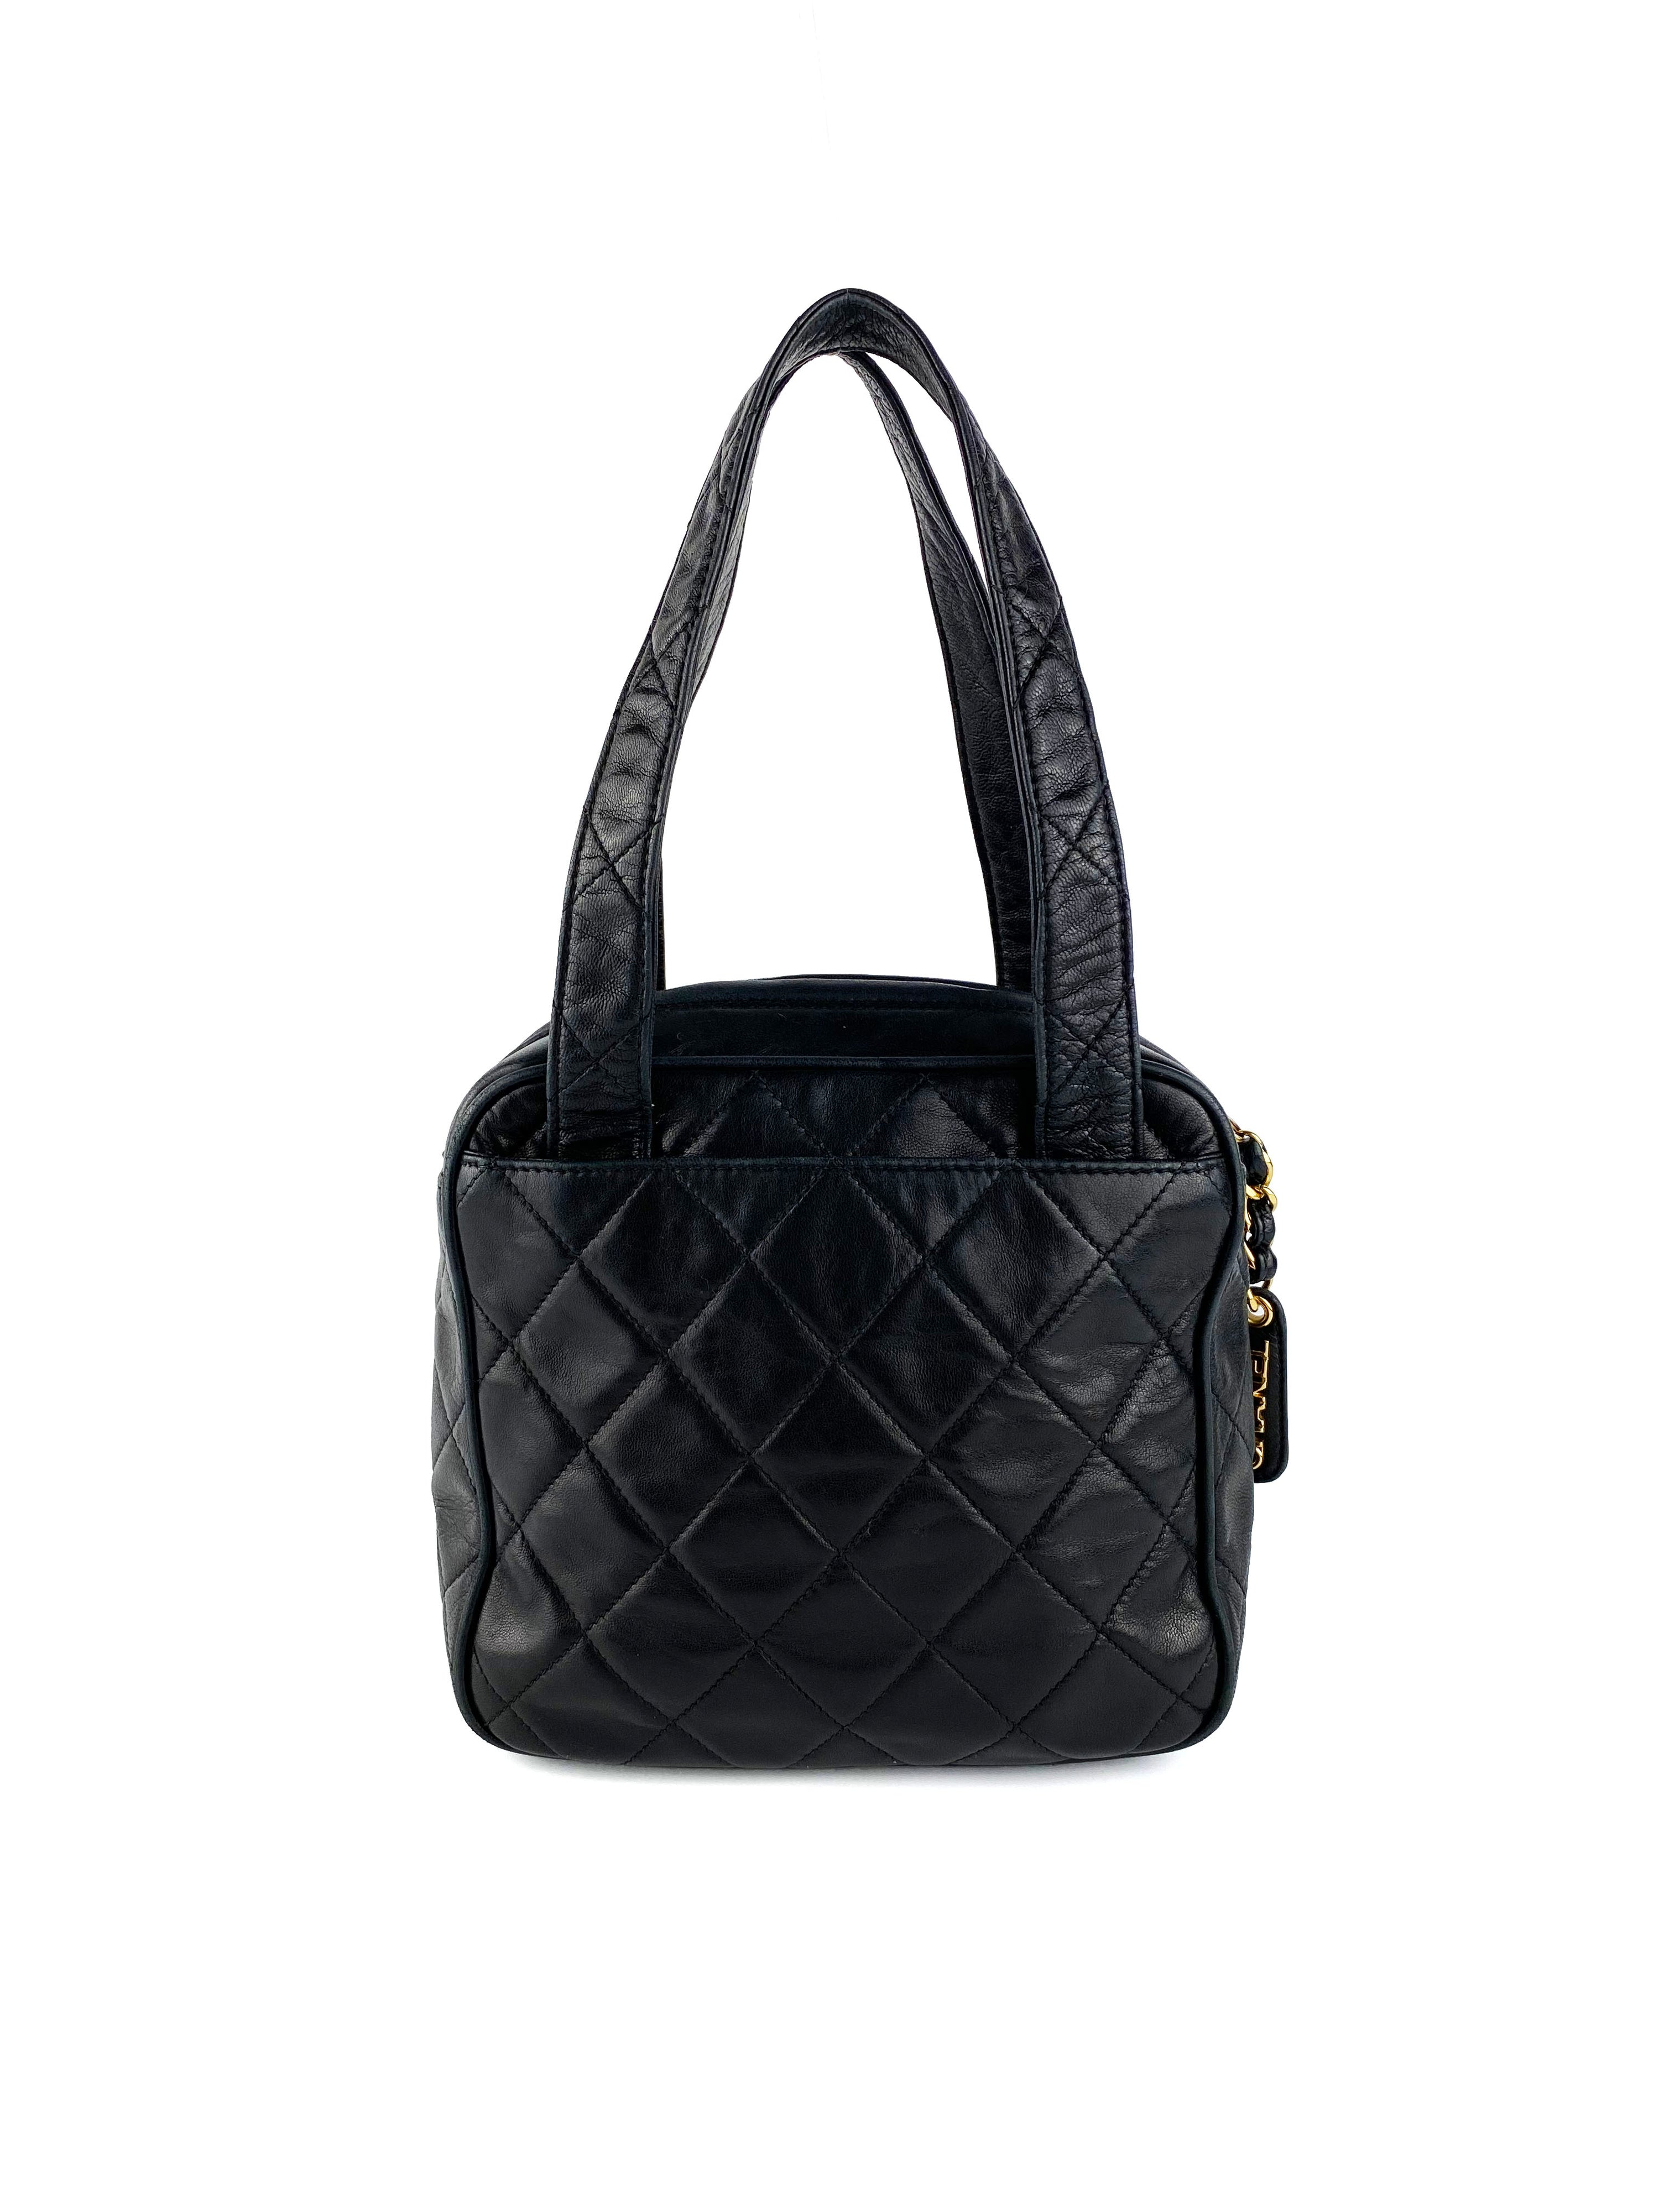 Chanel Black Vintage Quilted Square Tote Bag